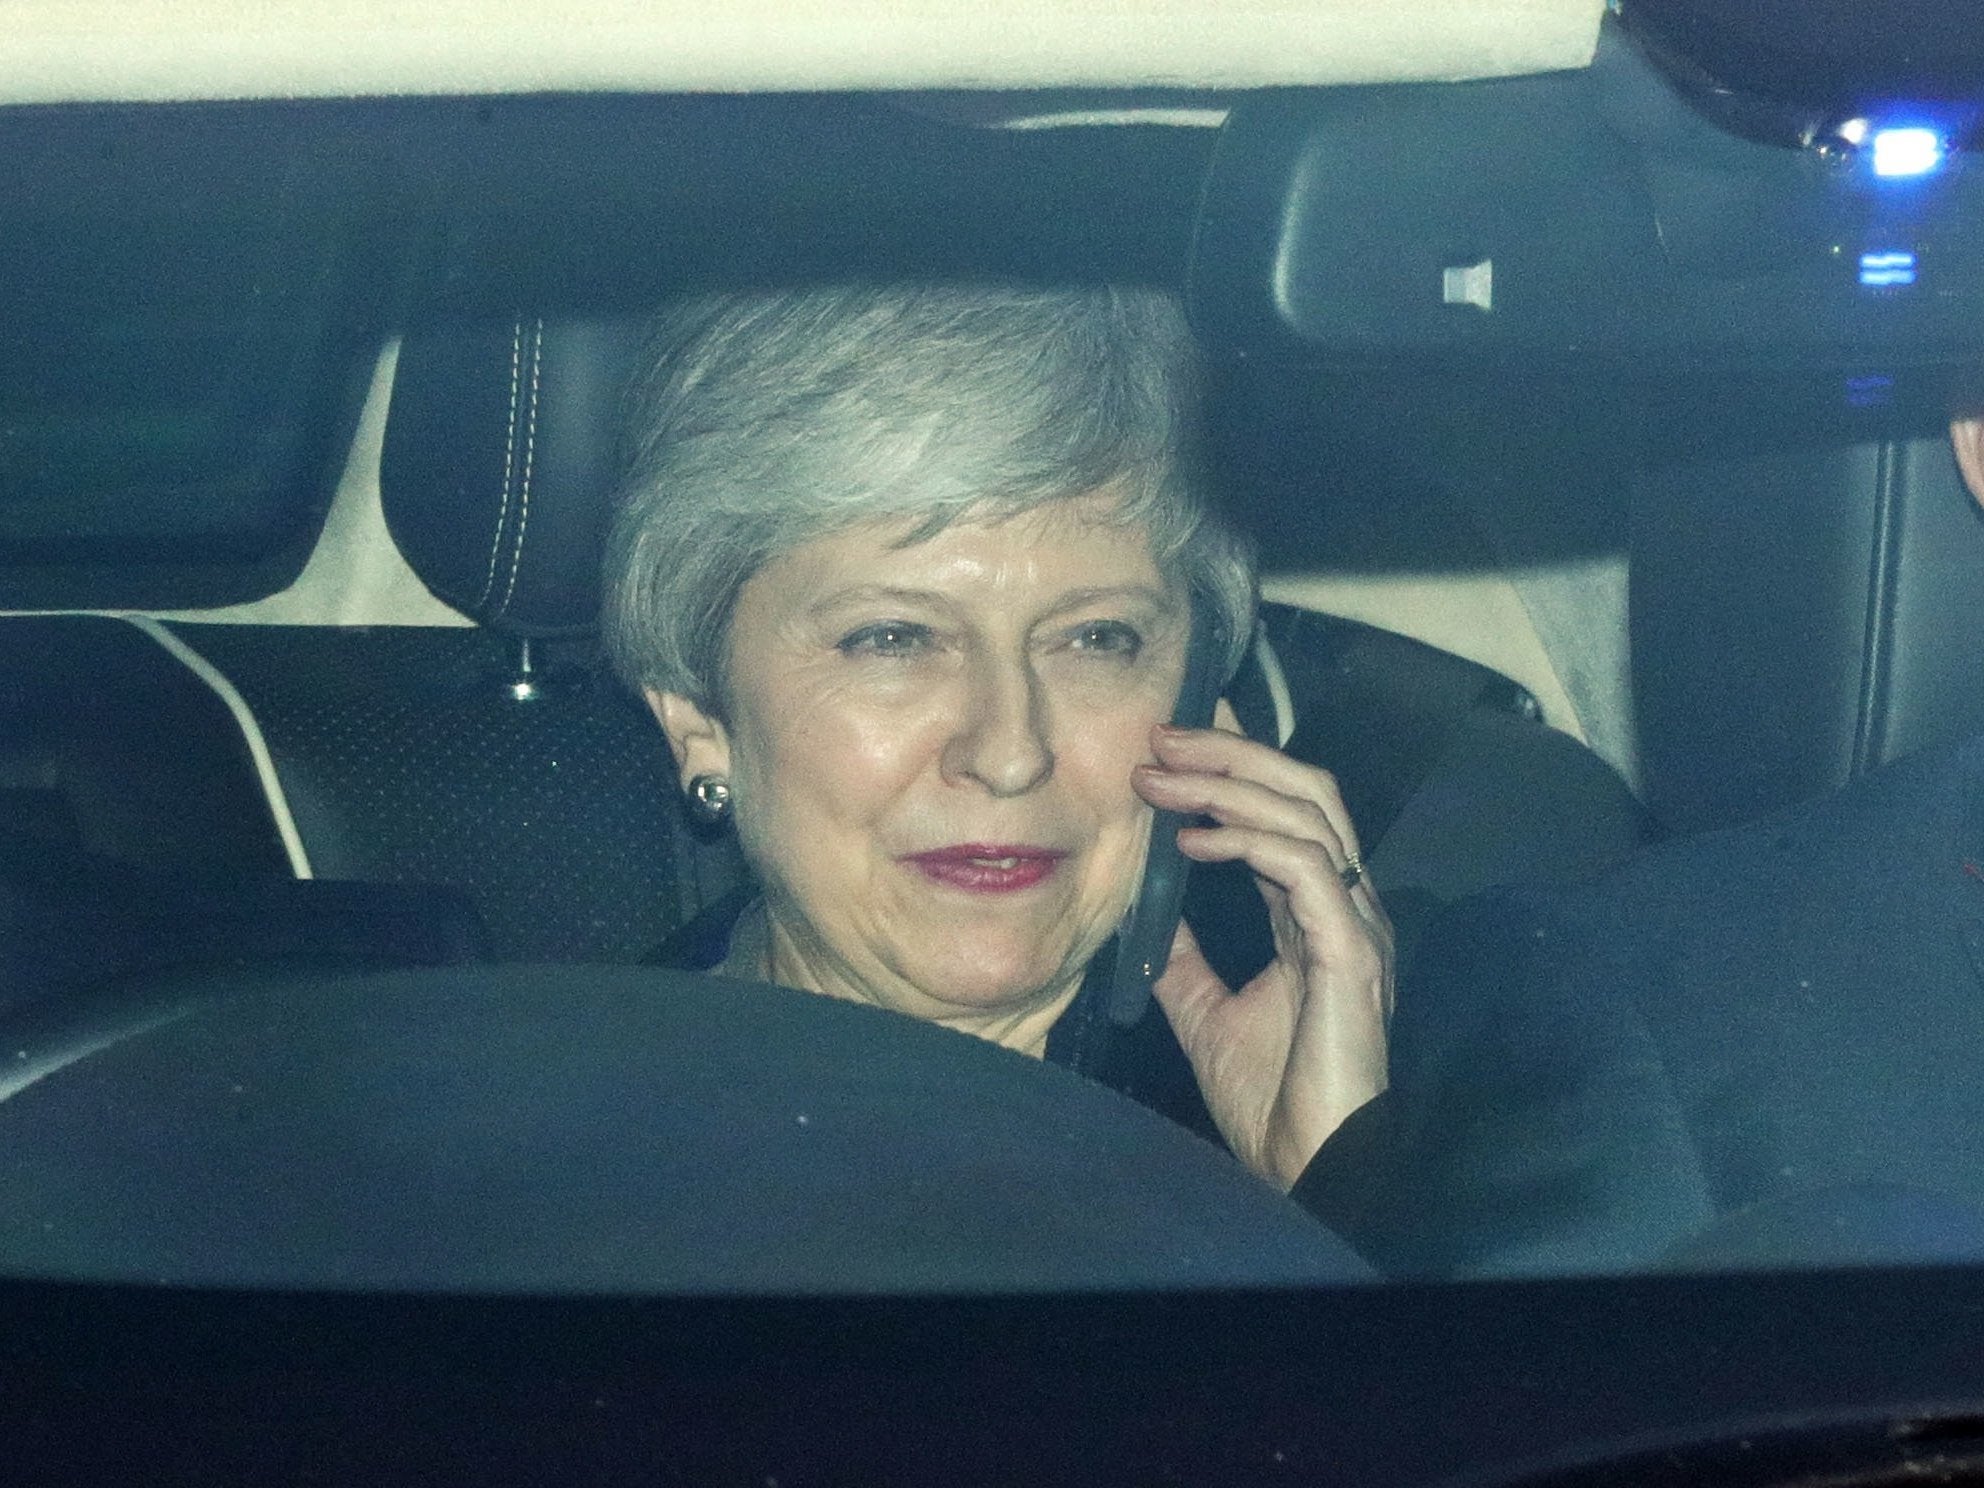 Brexit: Theresa May&apos;s final bid to win Commons vote already looks doomed as Tory rebels and DUP vow to oppose it